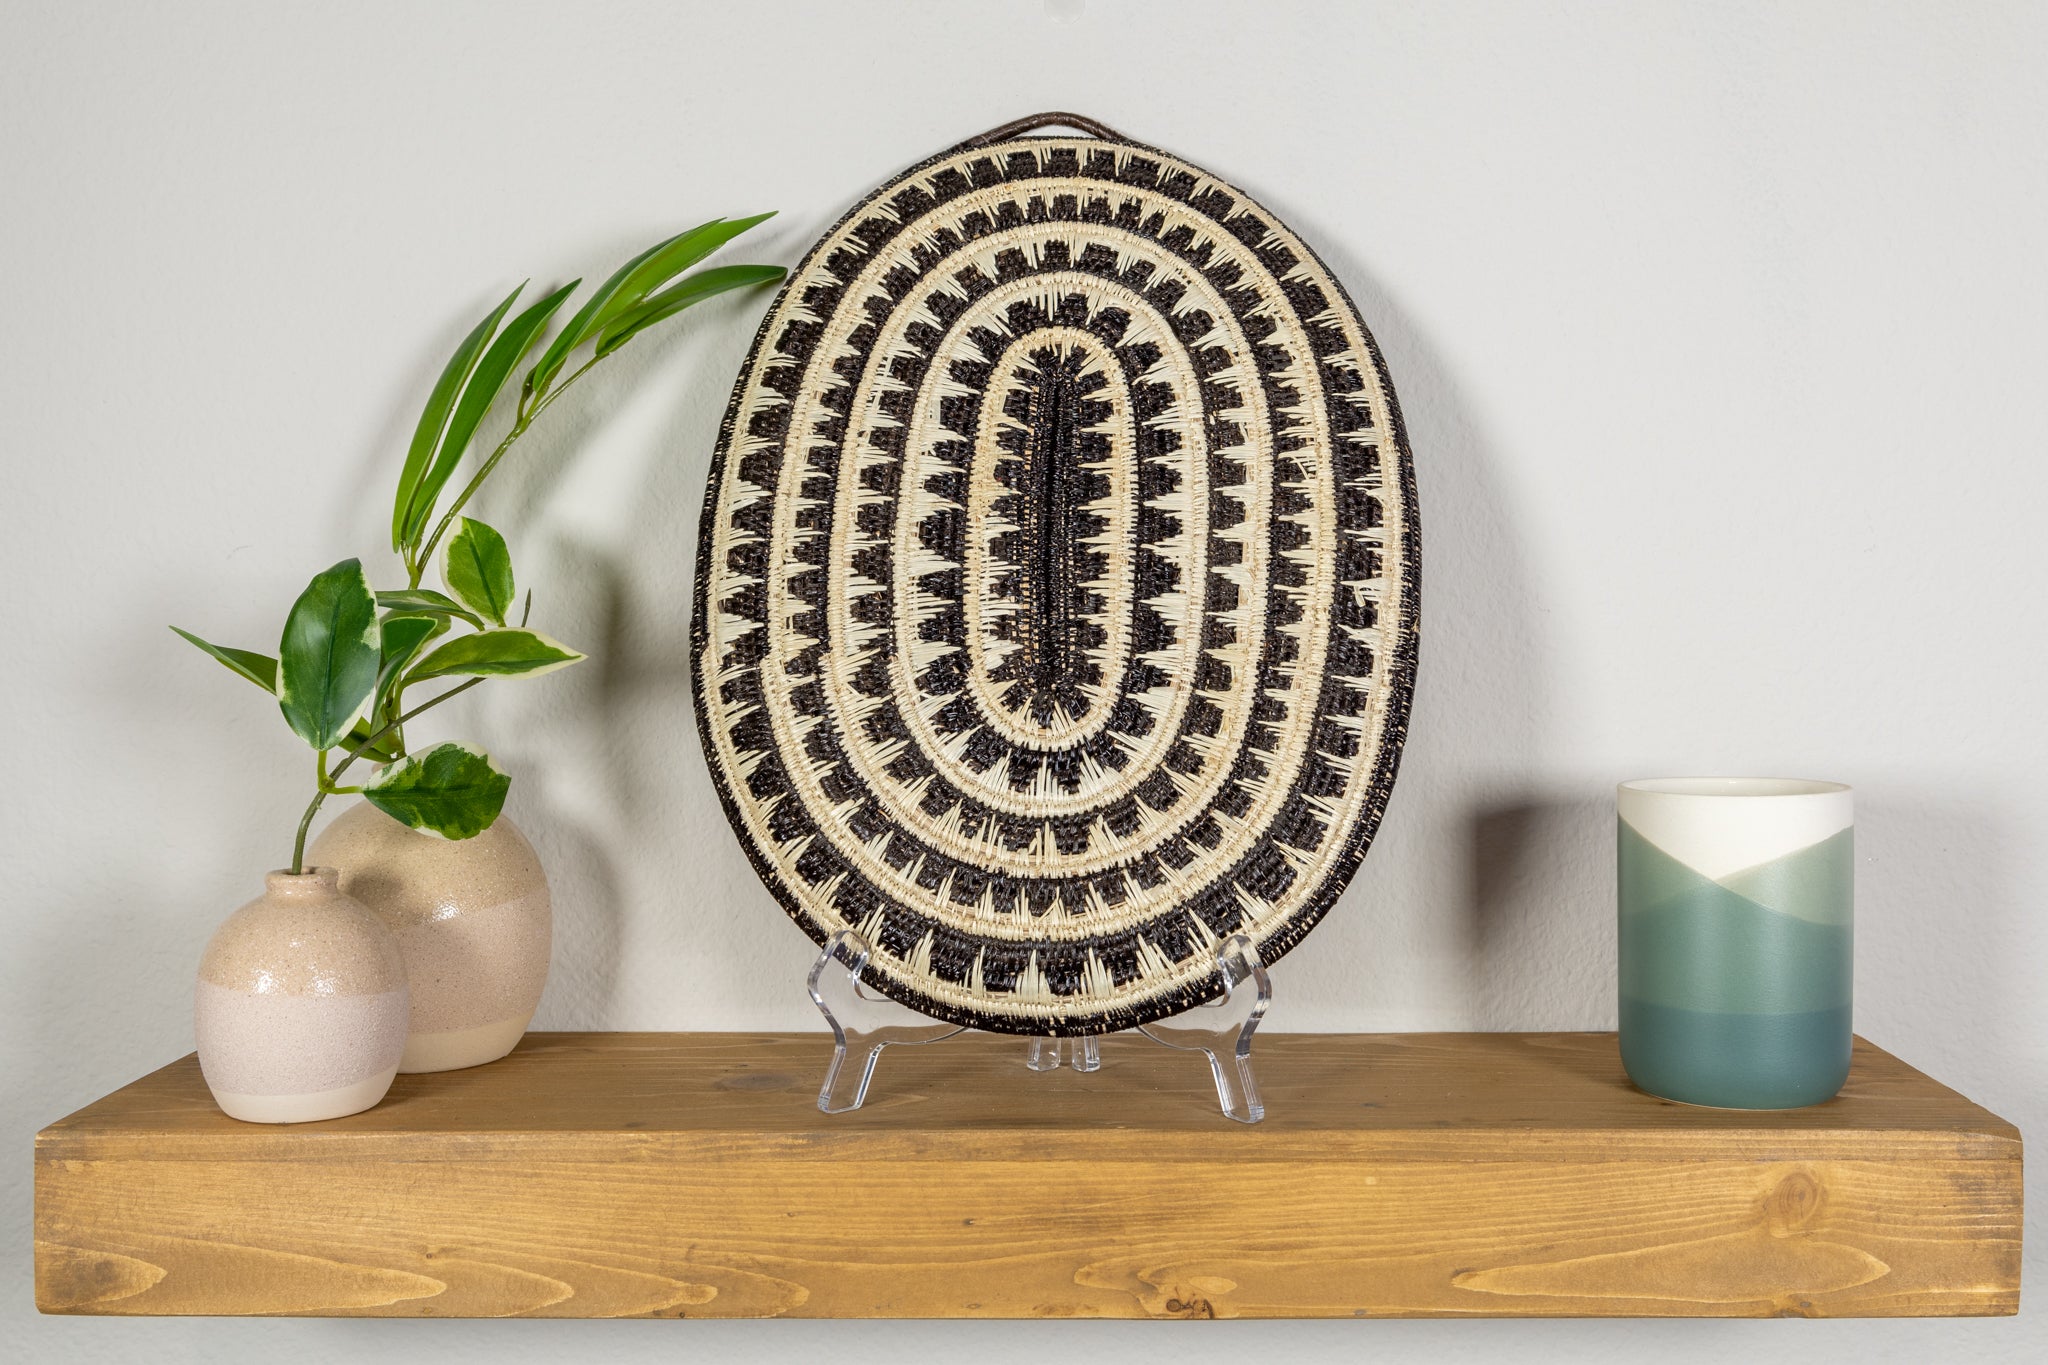 Black and White Oval-Shaped Basket Plate